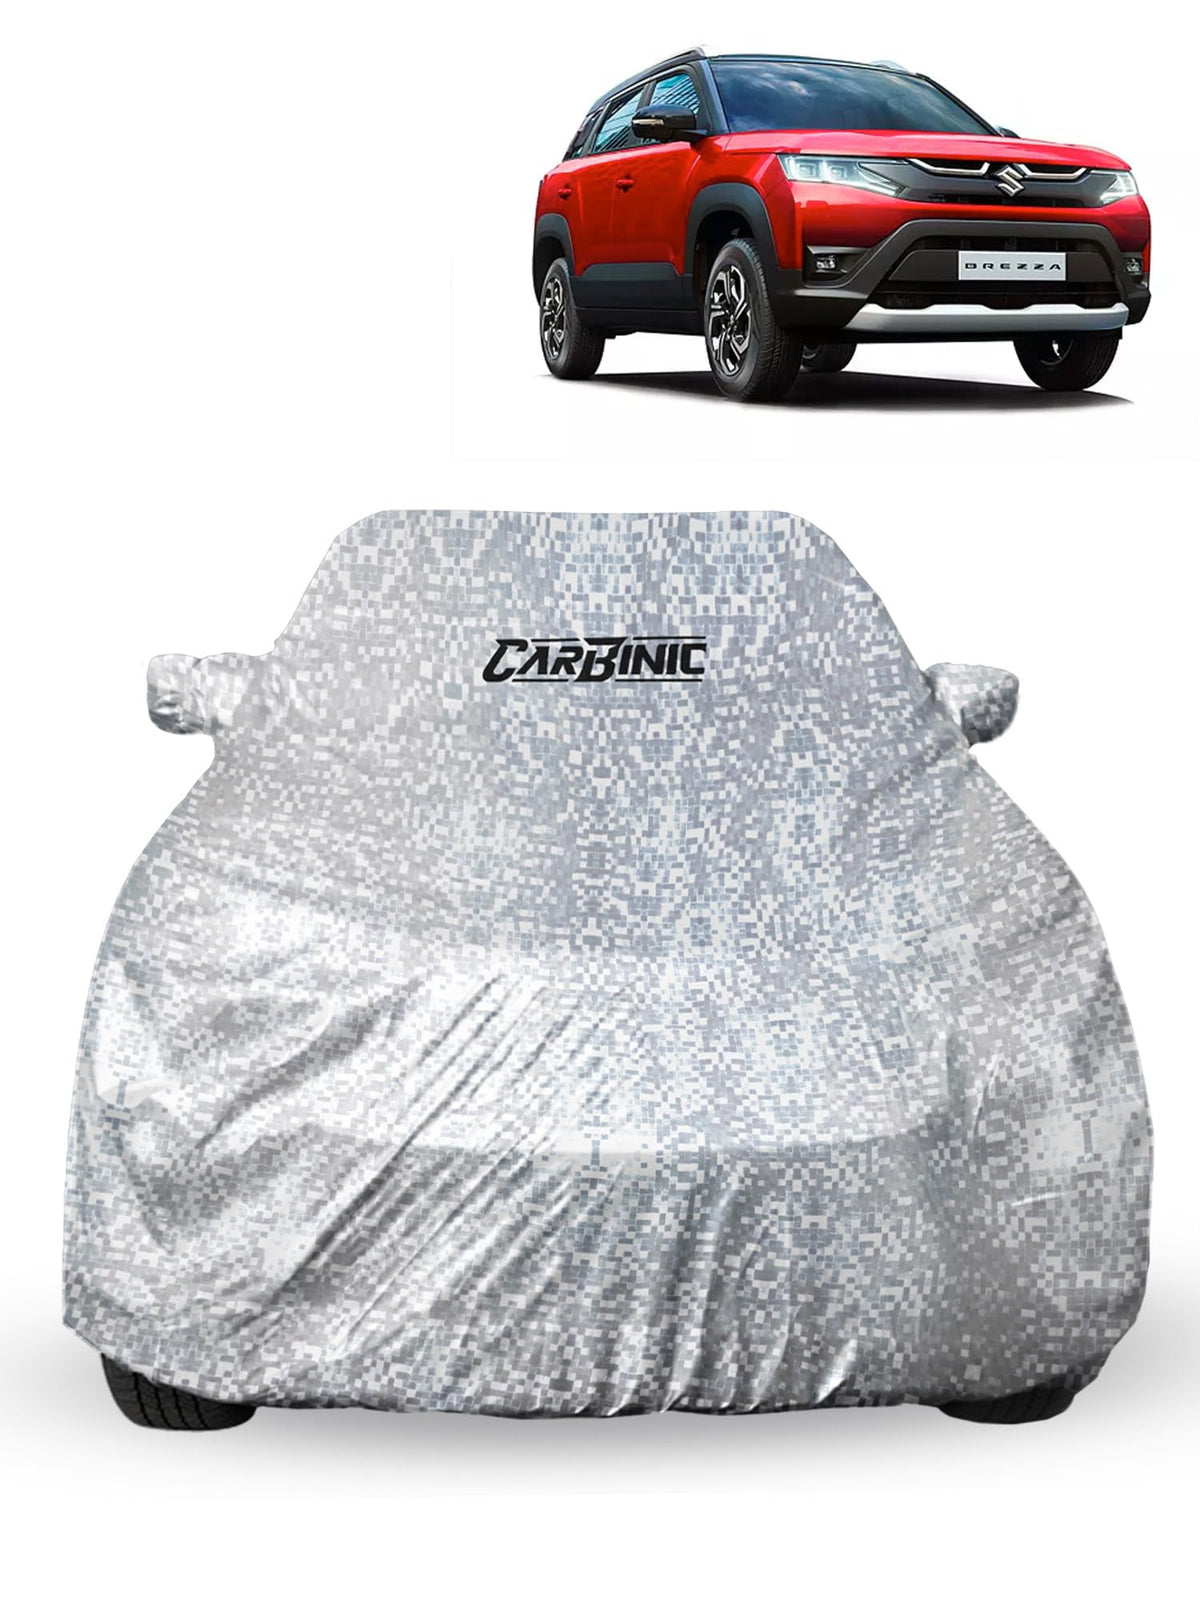 CARBINIC Car Cover for Maruti Brezza2022 Waterproof (Tested) and Dustproof Custom Fit UV Heat Resistant Outdoor Protection with Triple Stitched Fully Elastic Surface | Silver with Pockets